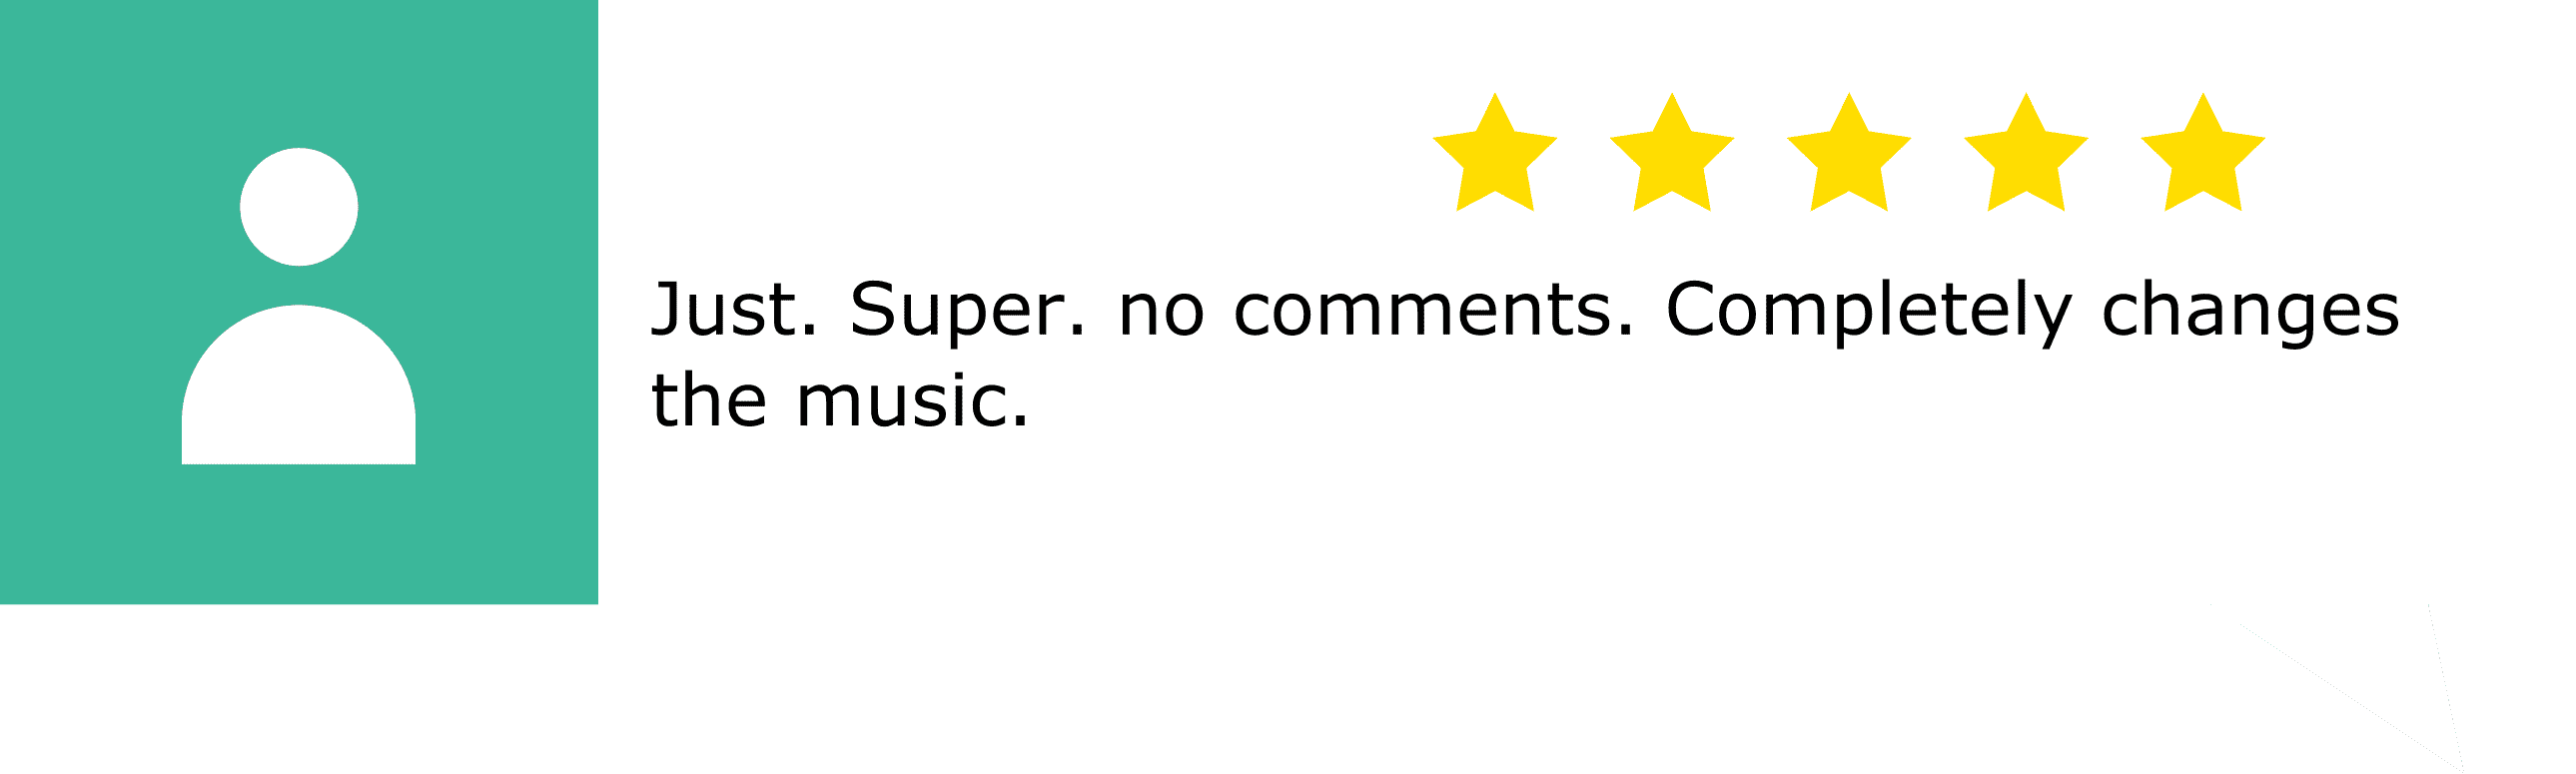 Green_Review_-_Just_Super